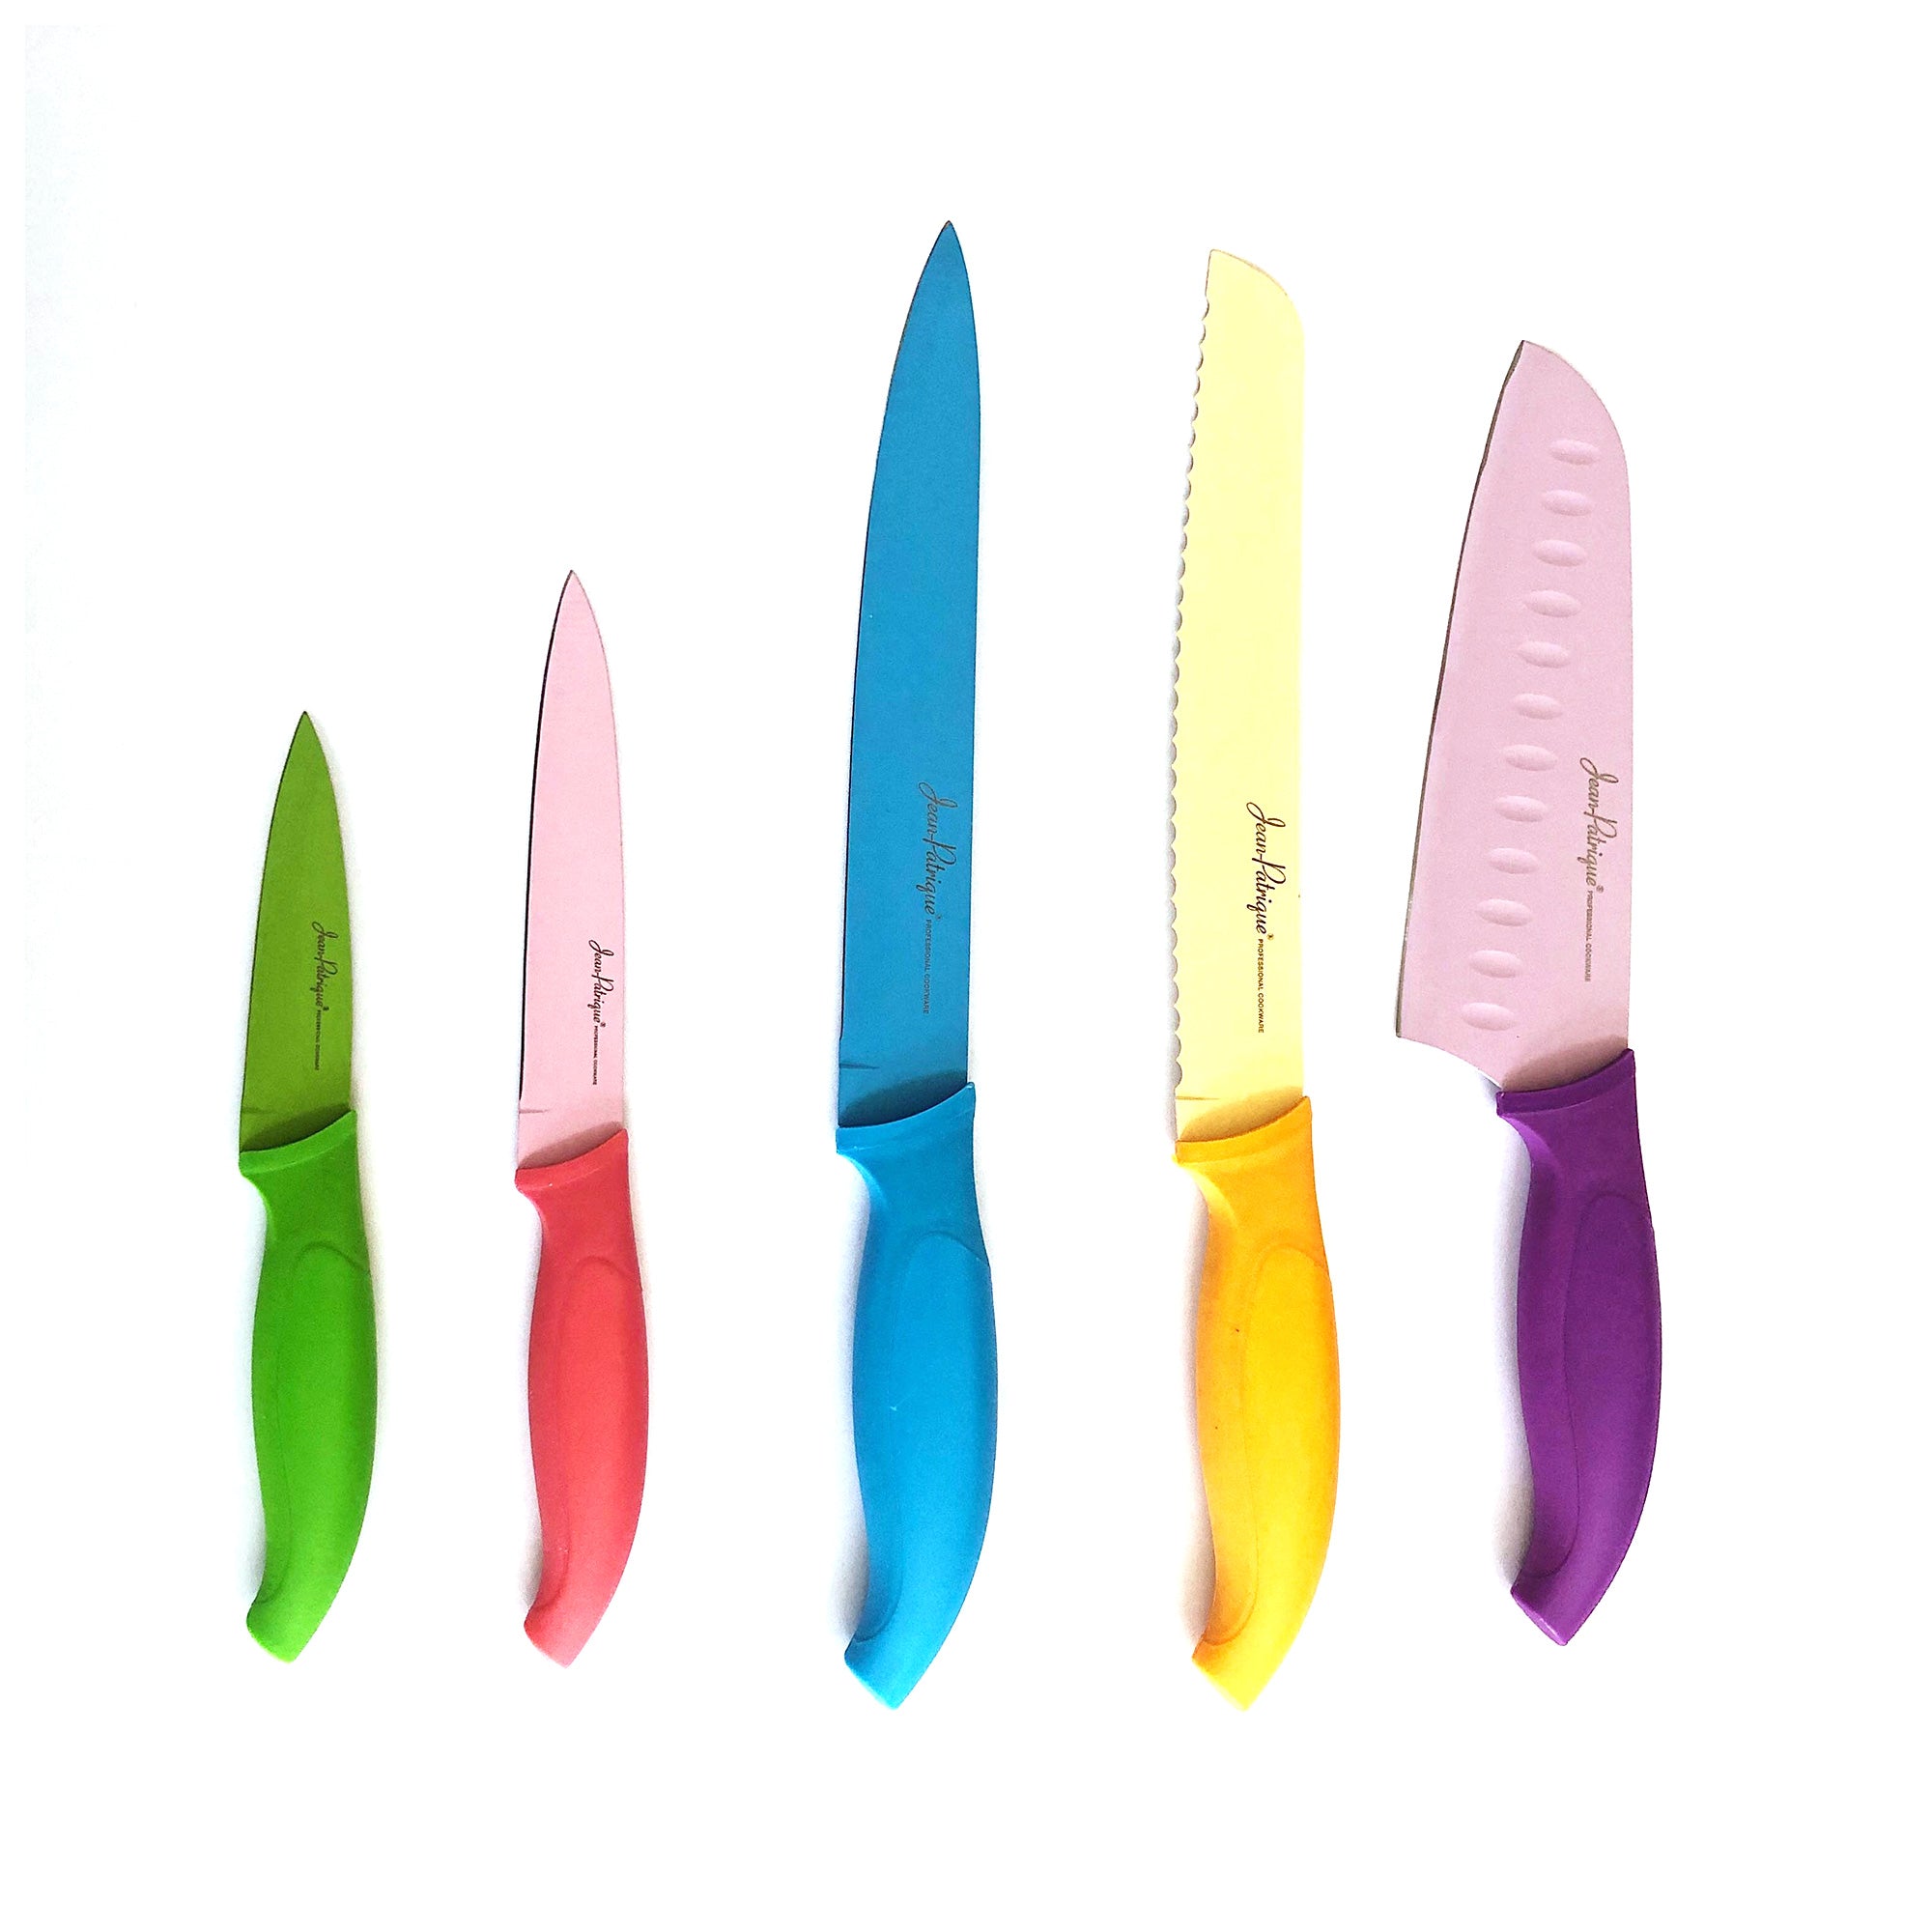 5-Piece Printed Color Kitchen Knife Set with Blade Cover - China